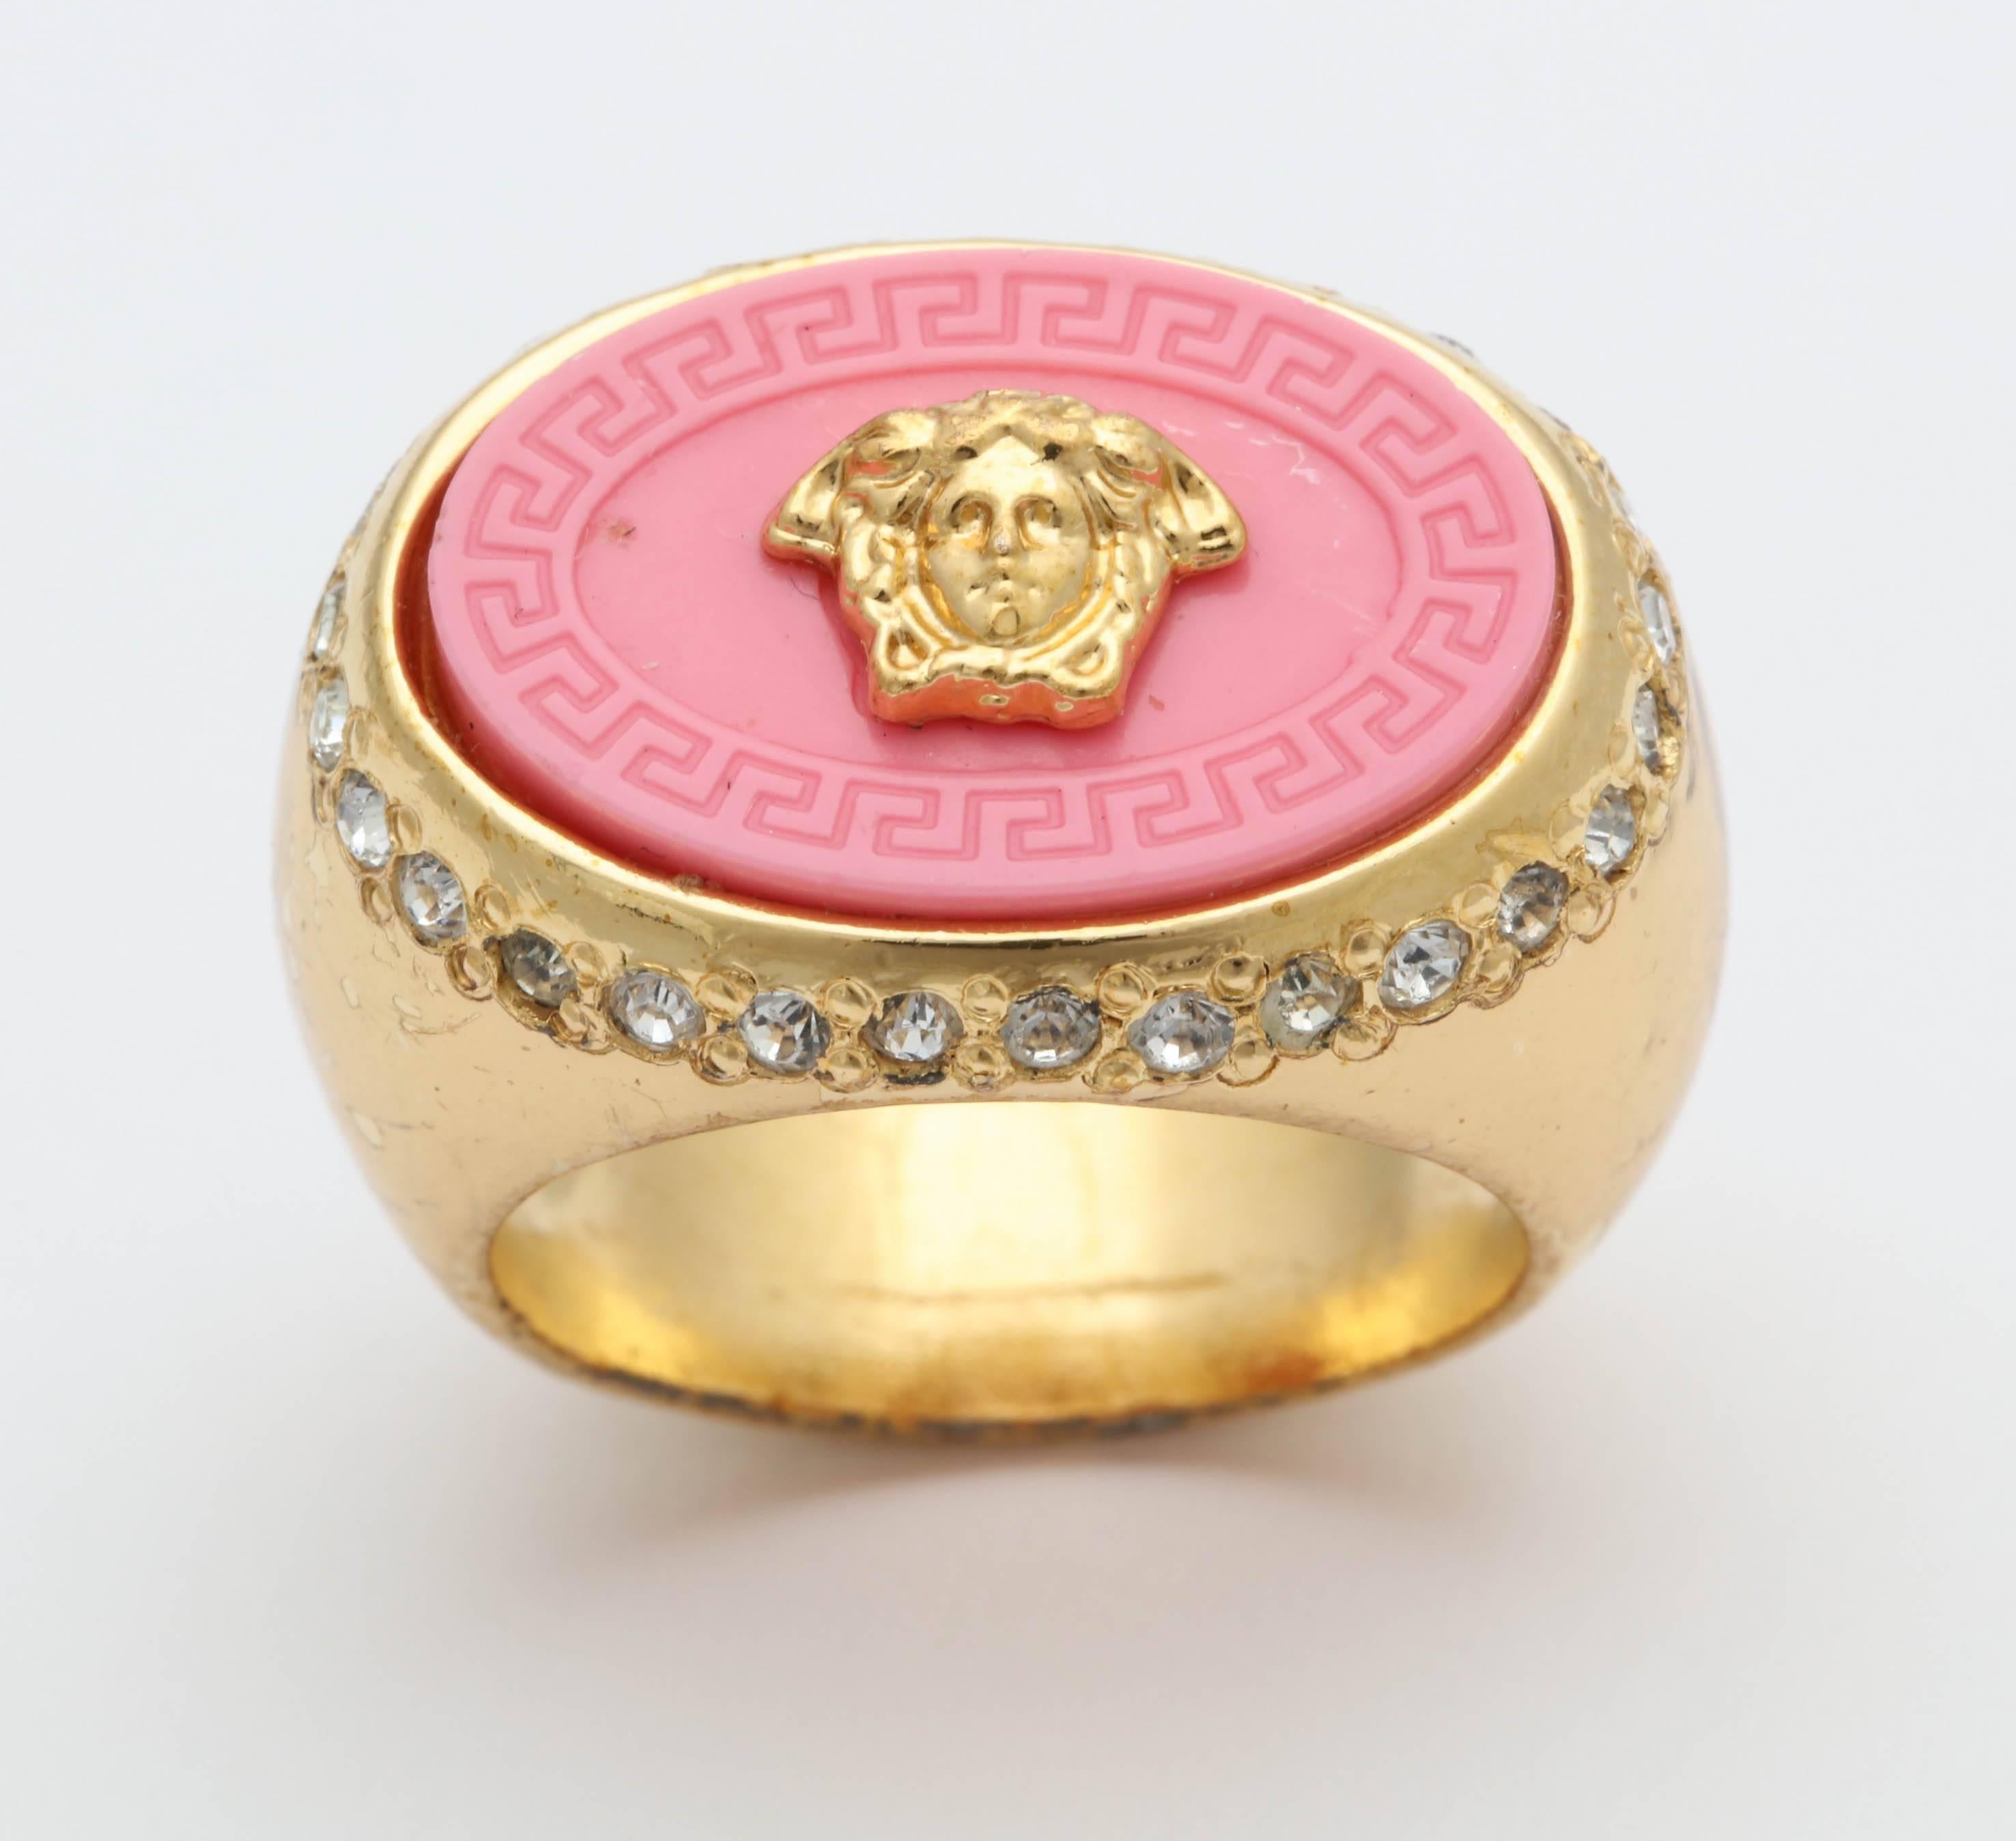 Beautiful Gianni Versace coral pink and gold ring with iconic Medusa motif. 